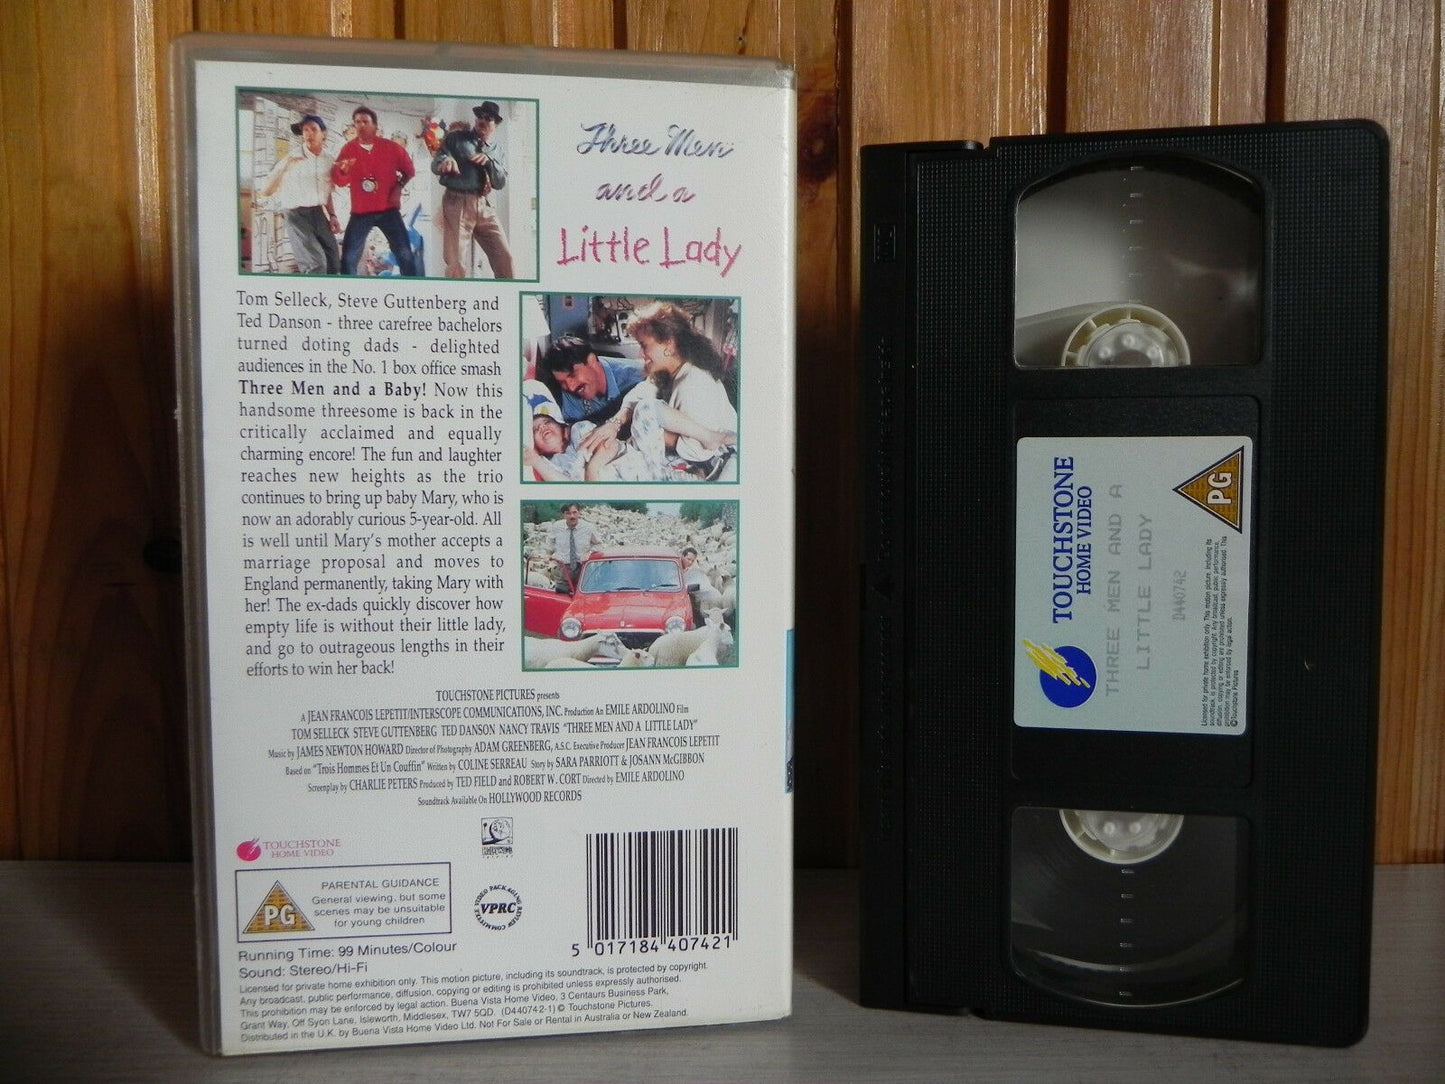 Three Men And A Lady - Dad And Daughter Comedy - Tom Selleck - Pal VHS-